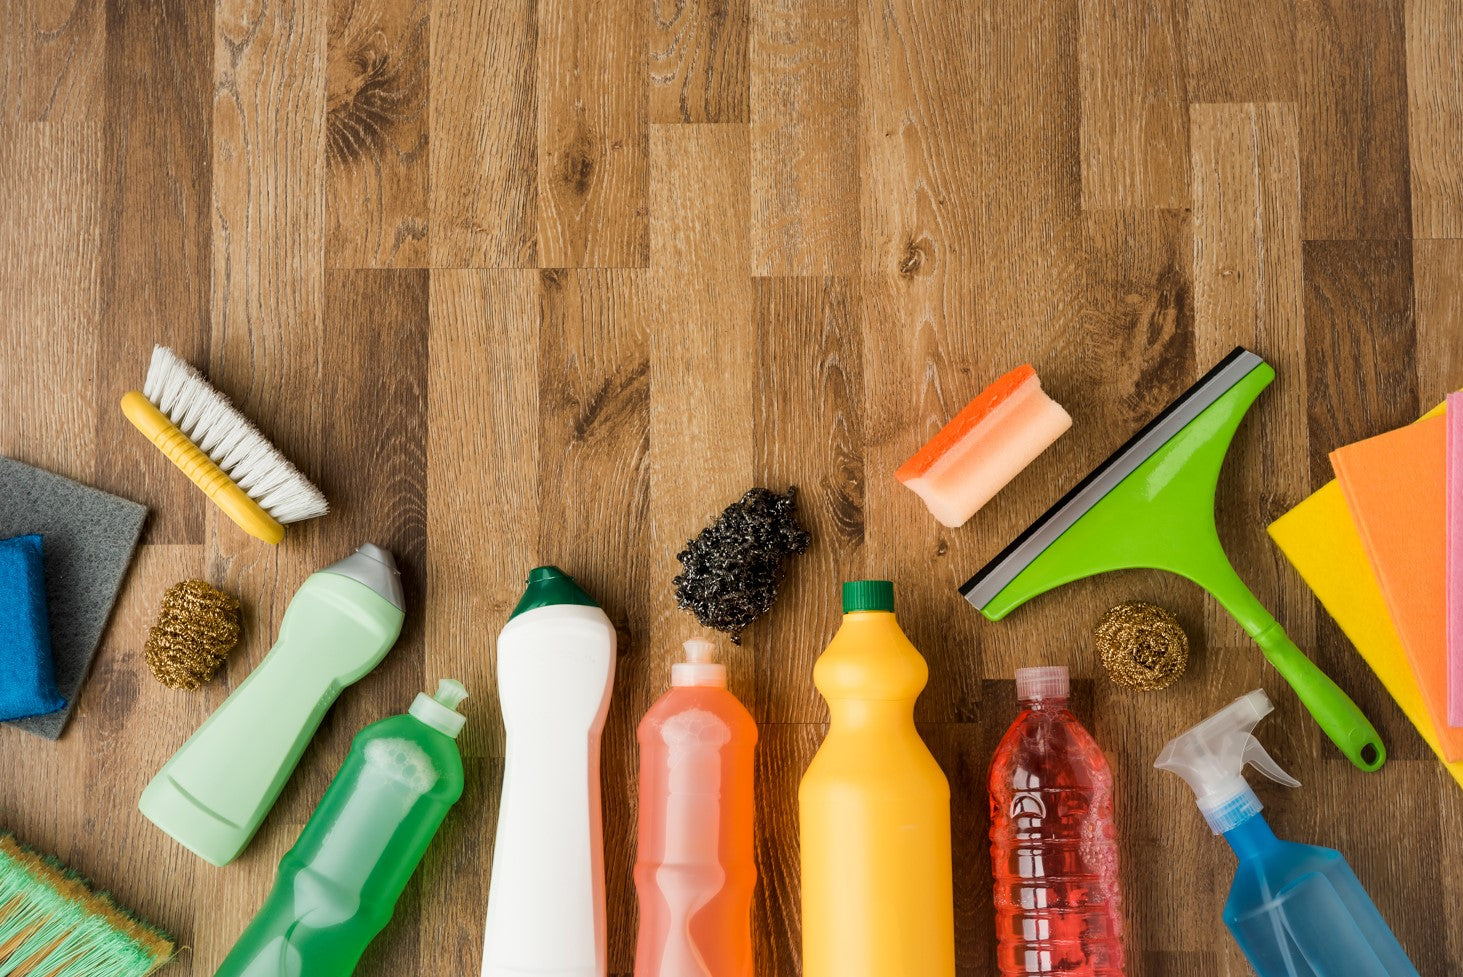 How to Choose the Right Cleaning Products for Different Surfaces